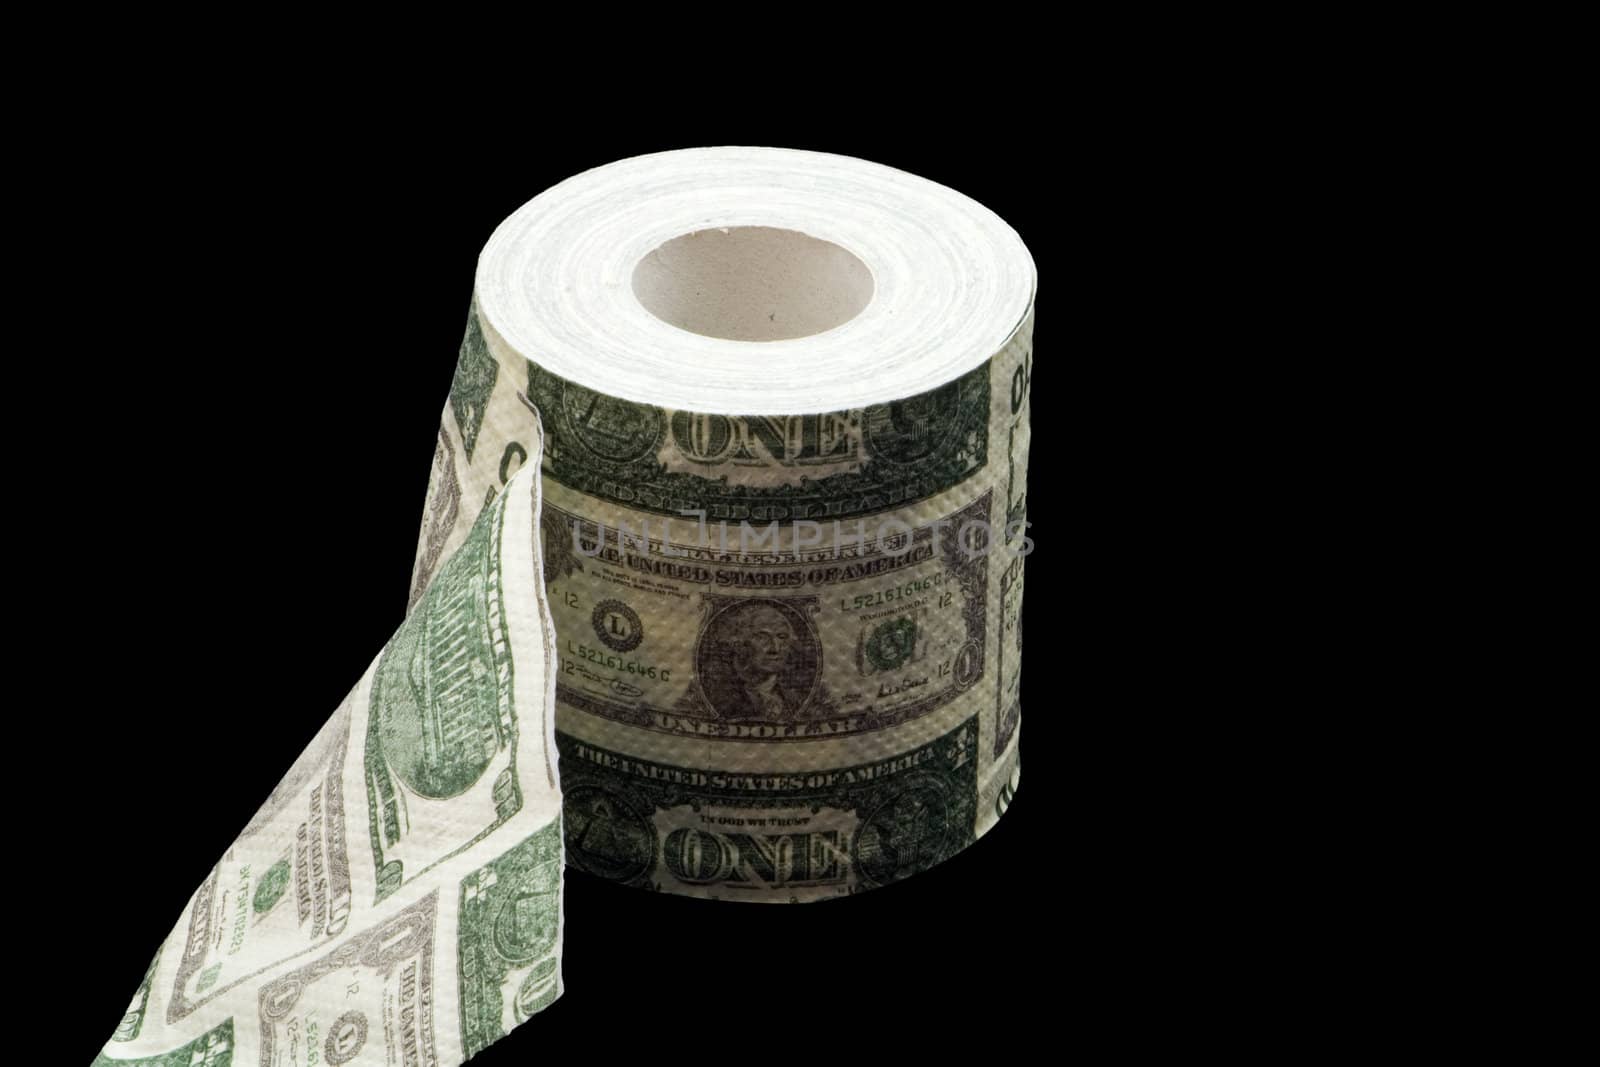 Roll of toilet paper with USD